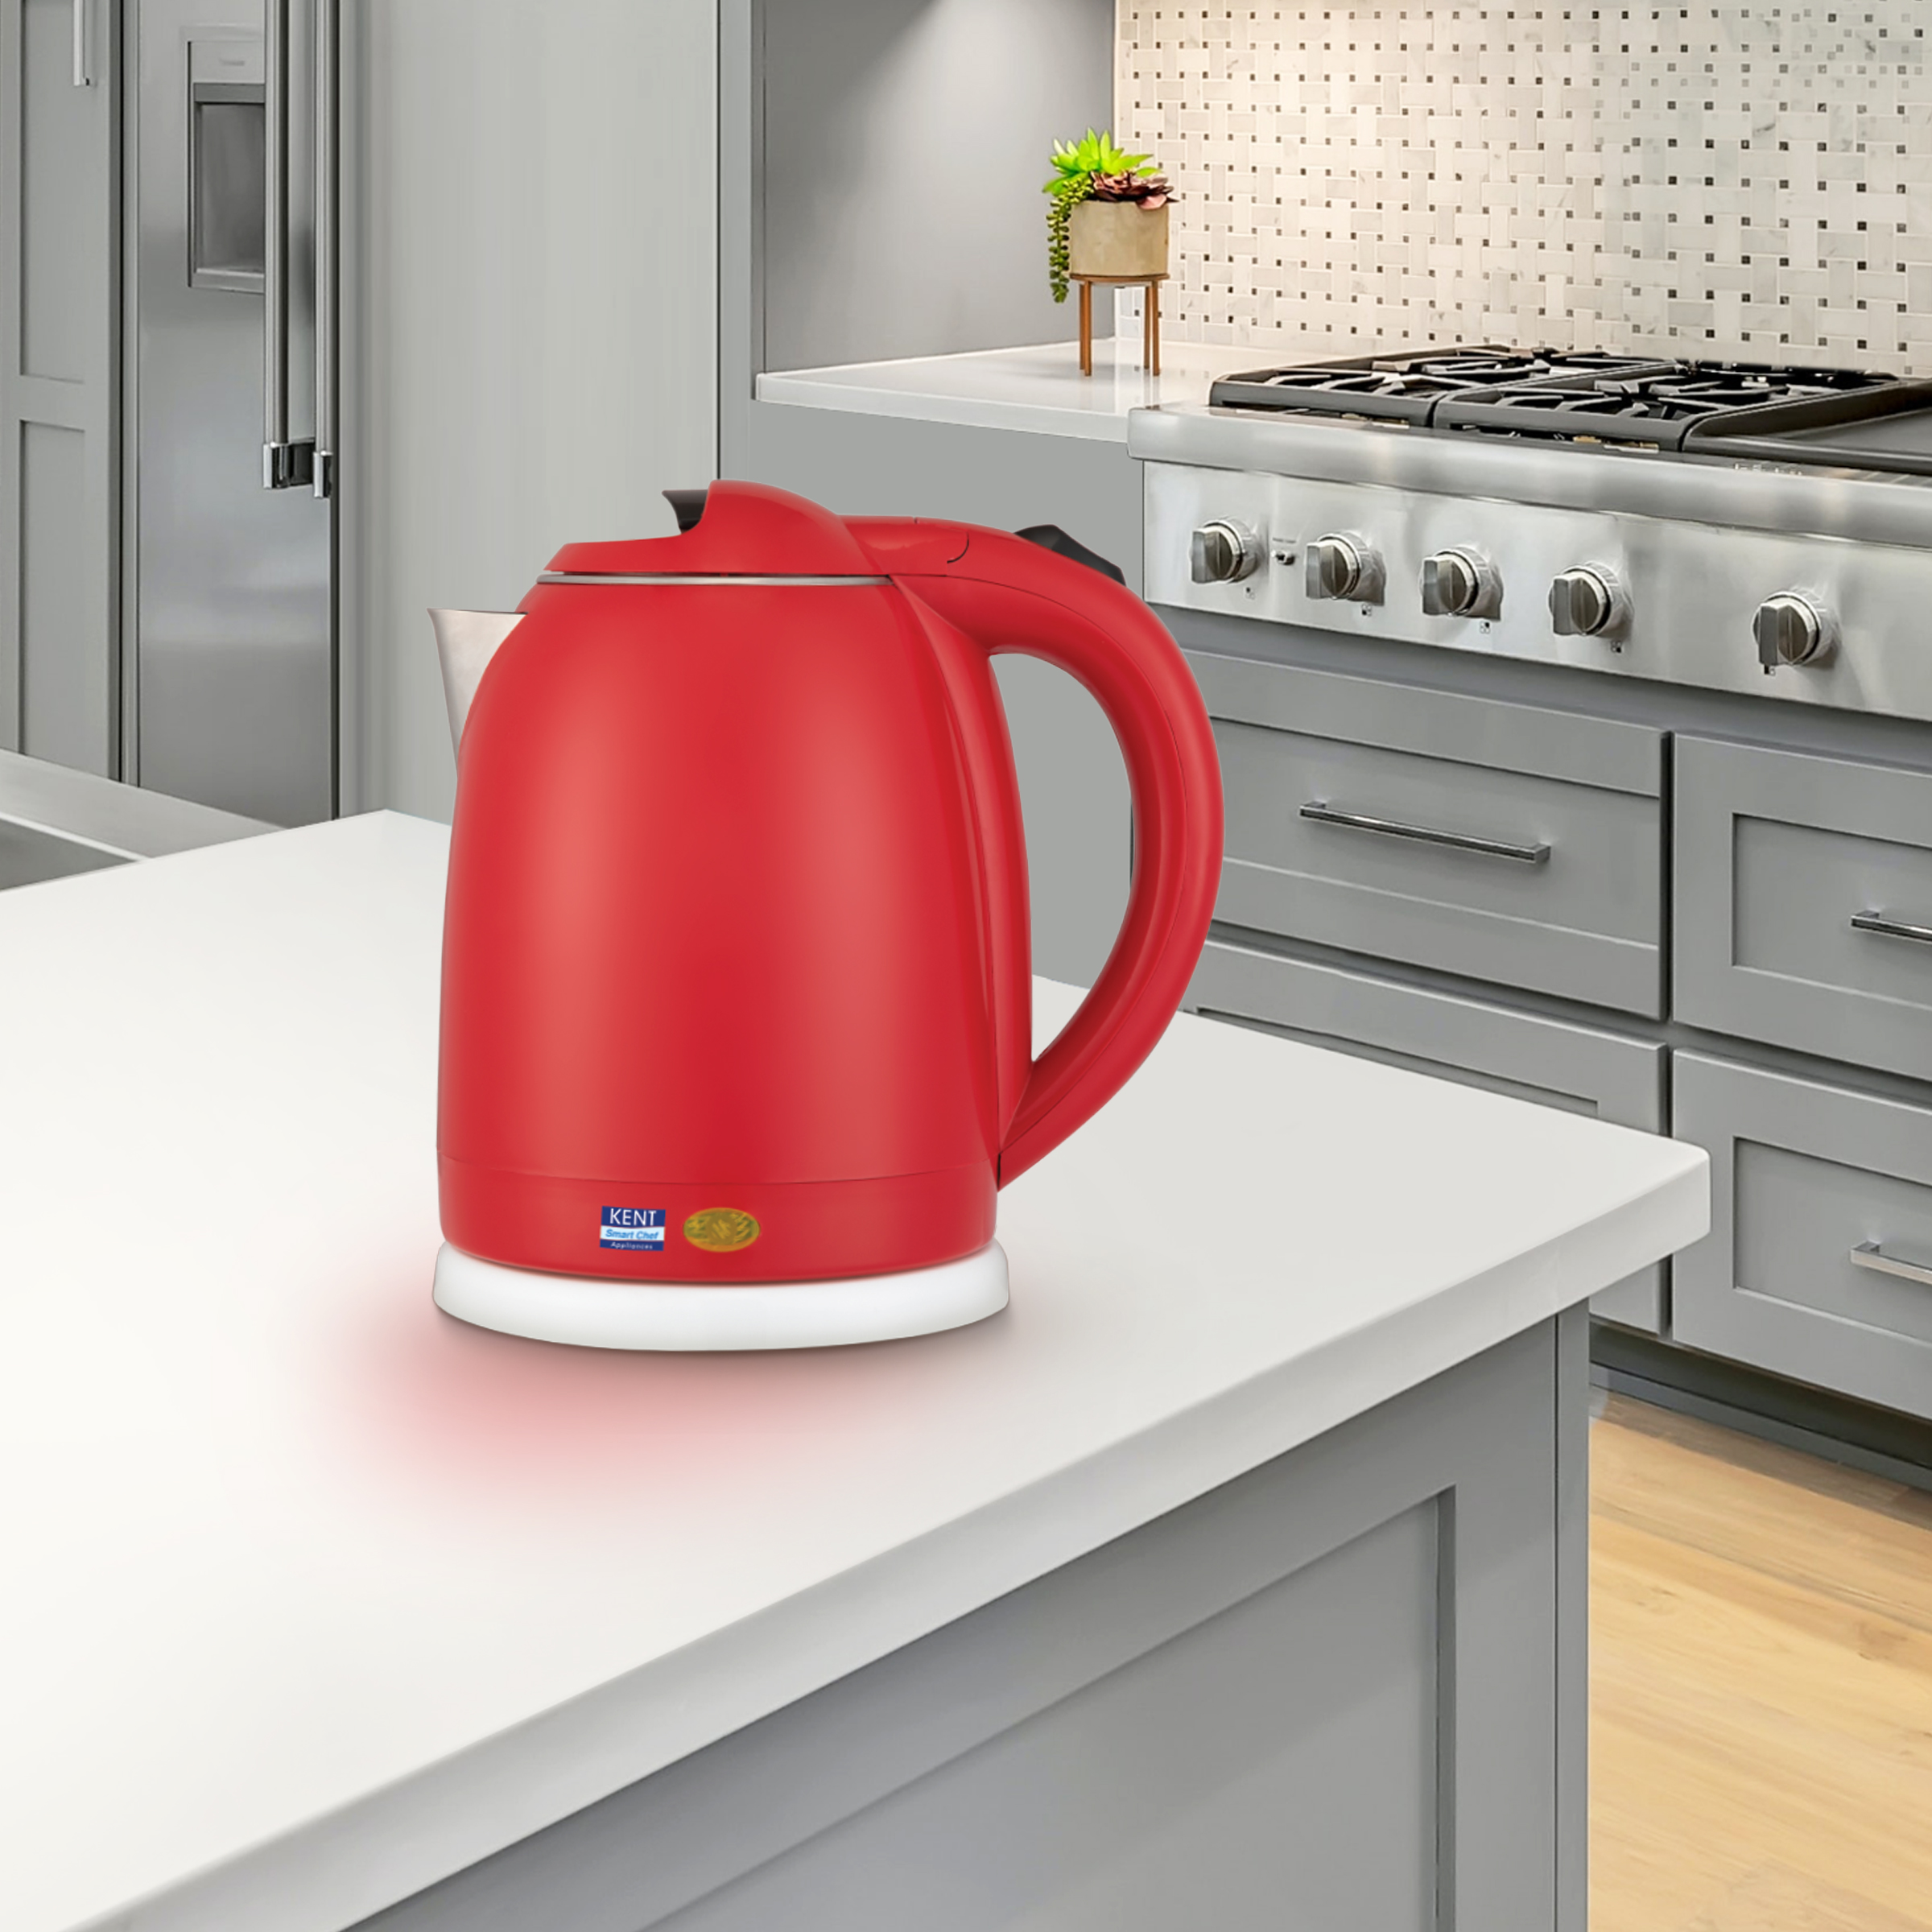 KENT Amaze Cool Touch Electric Kettle 1.8 L 1500 W Plastic Outer